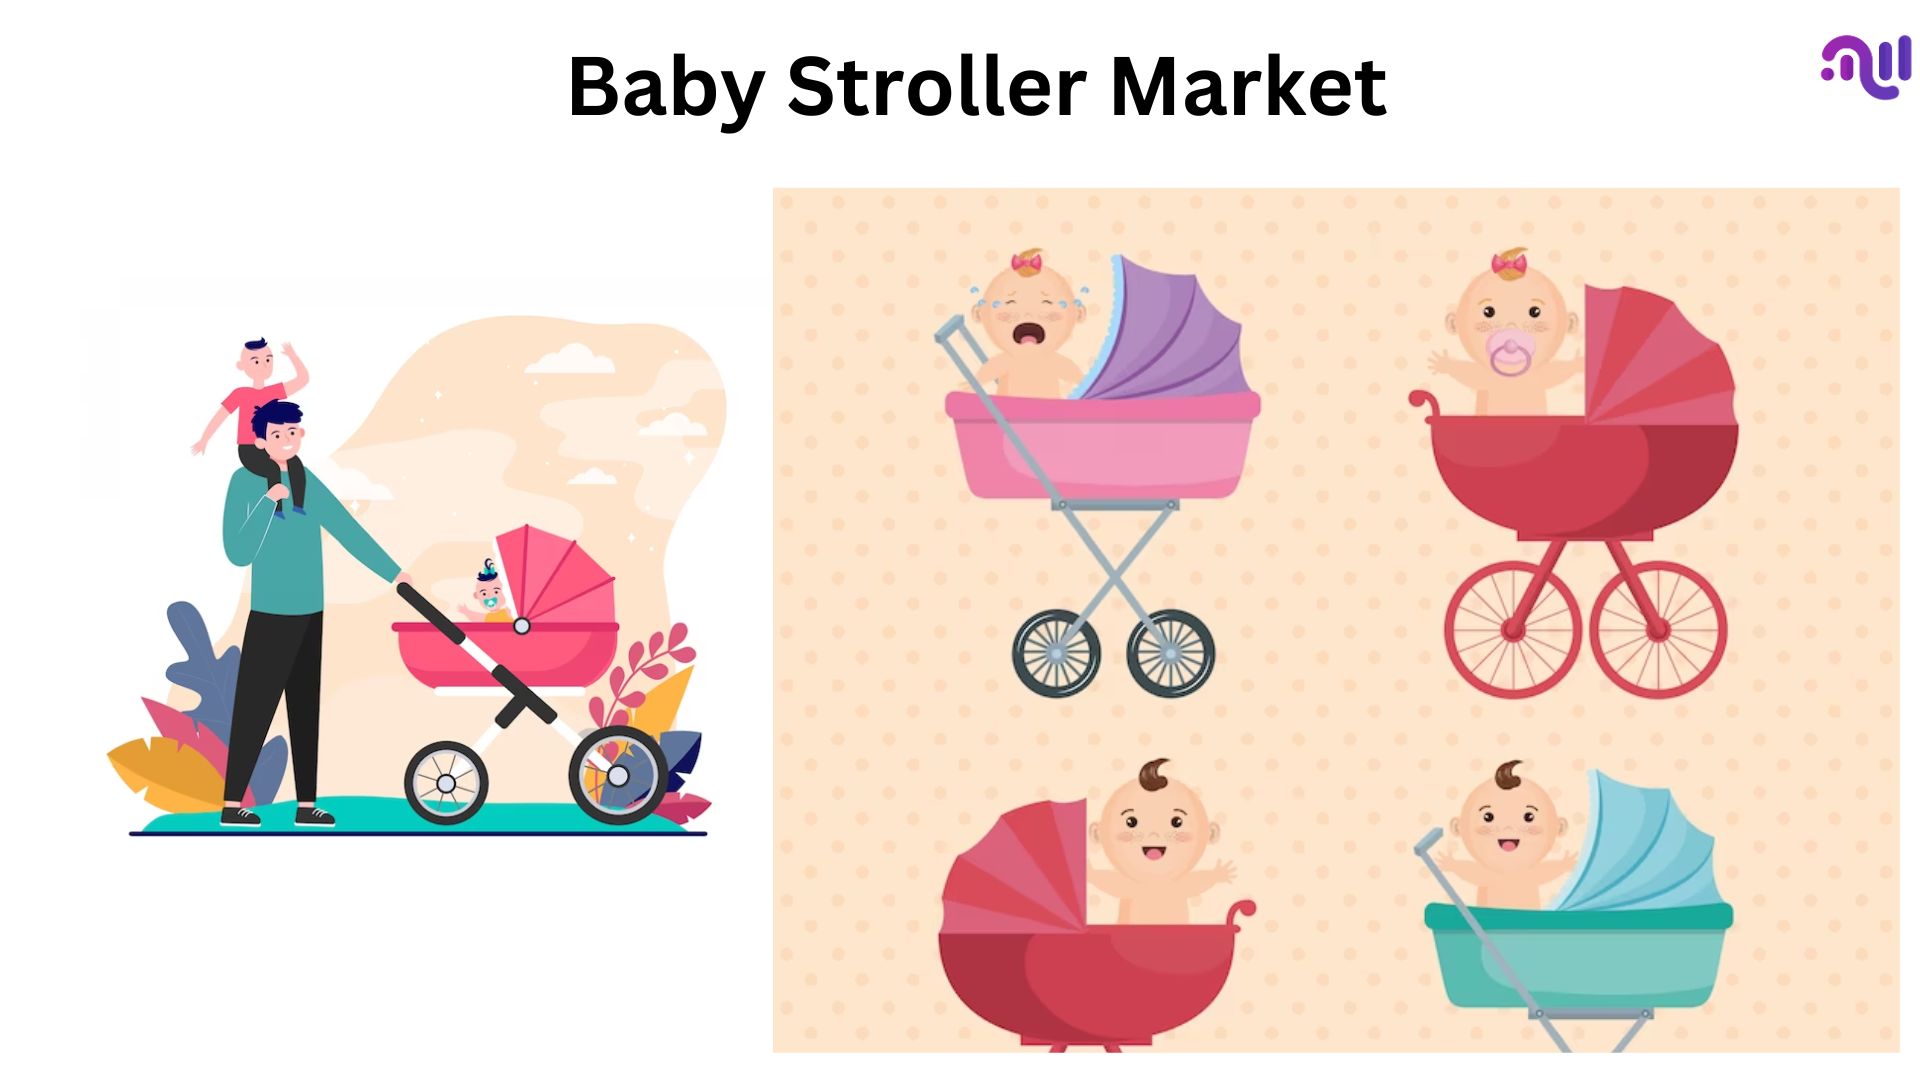 Baby Stroller Market Sales Are Expected To Flourish at a CAGR of 6.2% from 2022 to 2032